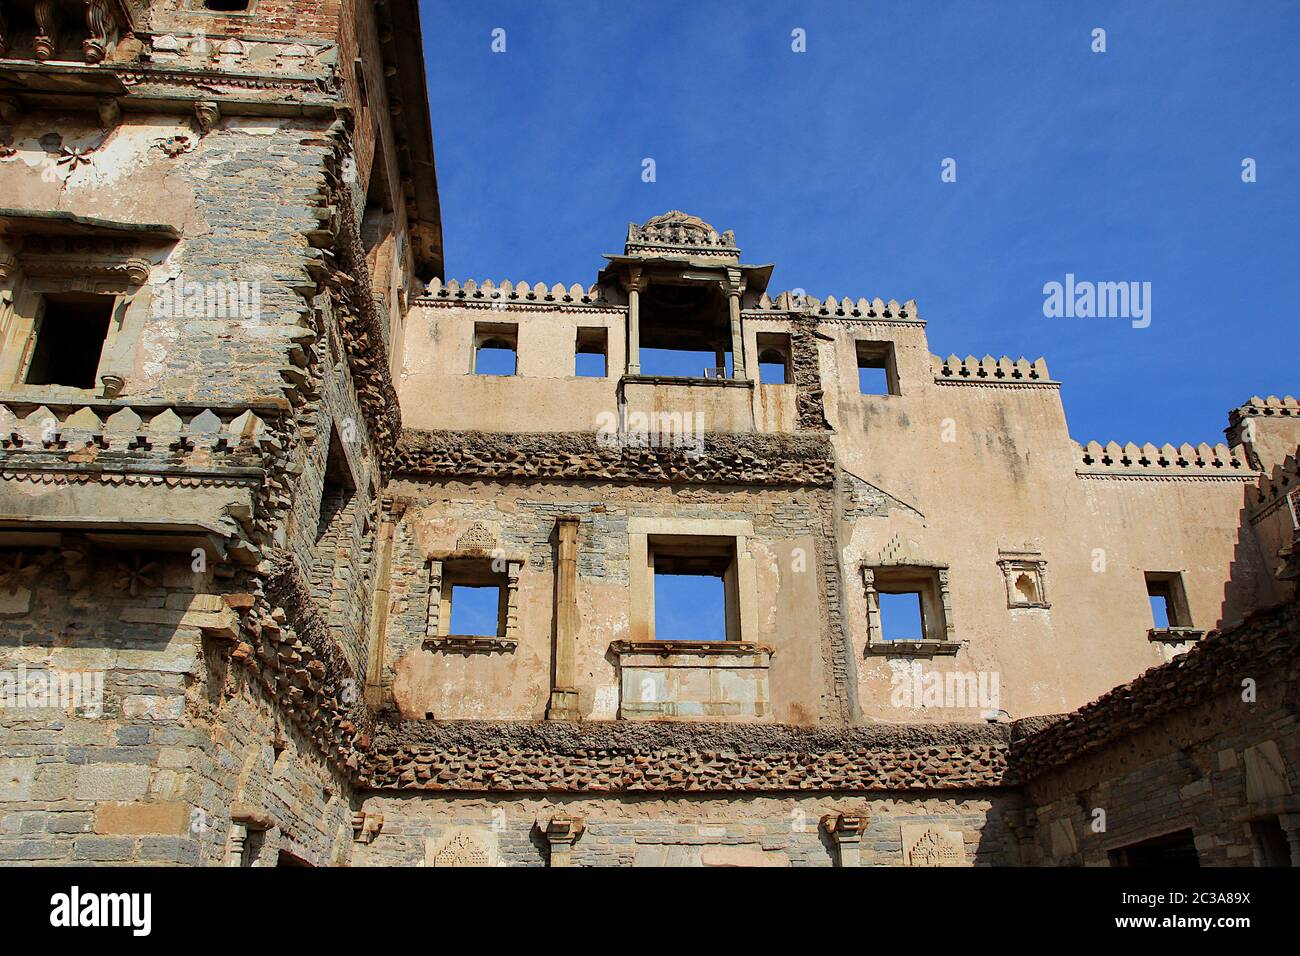 Frontal view of portion of palace and gallery at Kumbh Mahal in Chittorgarh Fort, Rajasthan, India, Asia Stock Photo